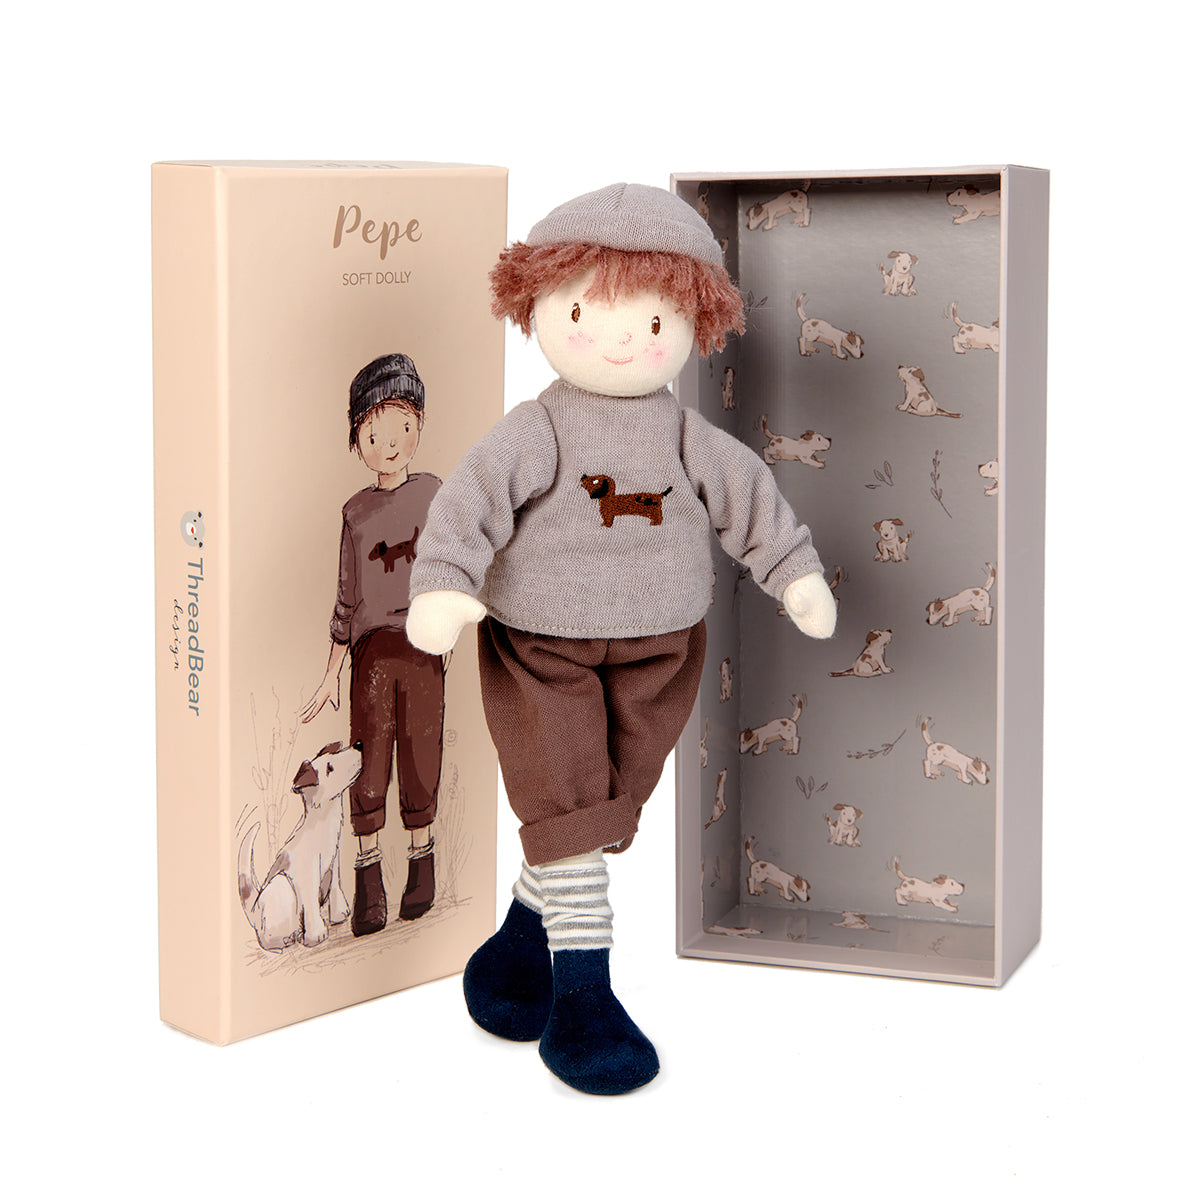 Pepe Rag Doll 25cm in Gift Box - for 3 years old